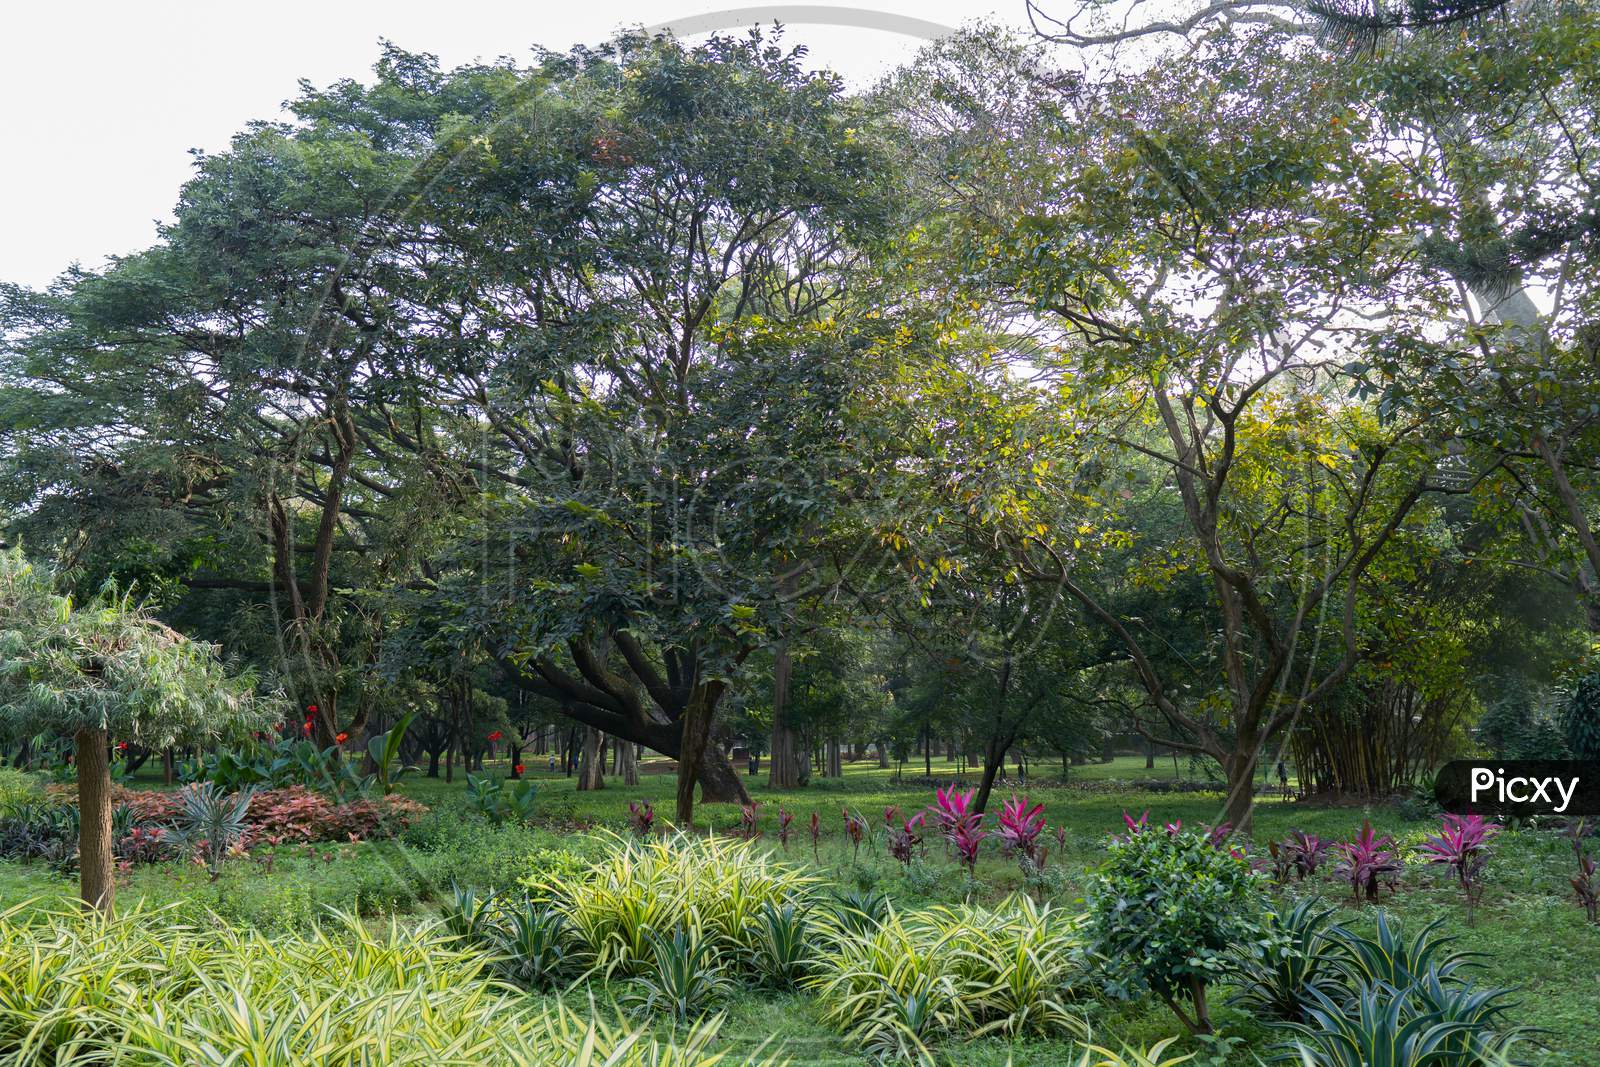 Different Kind Trees And Plants In The Cubbon Park In The Morning